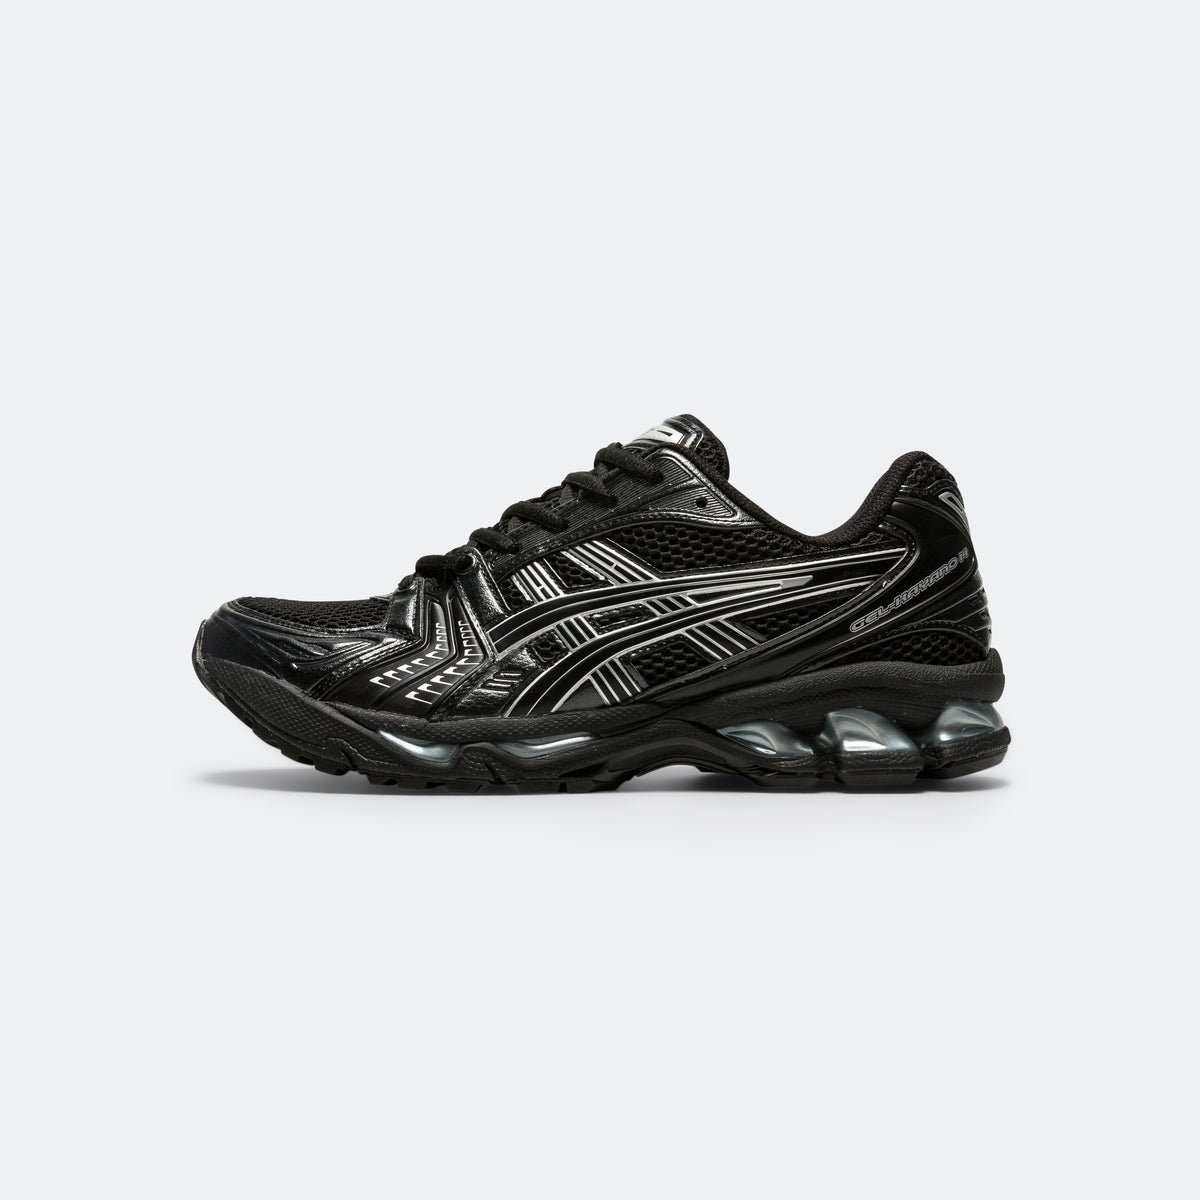 ASICS GEL-Kayano 14 - Black/Pure Silver | UP THERE